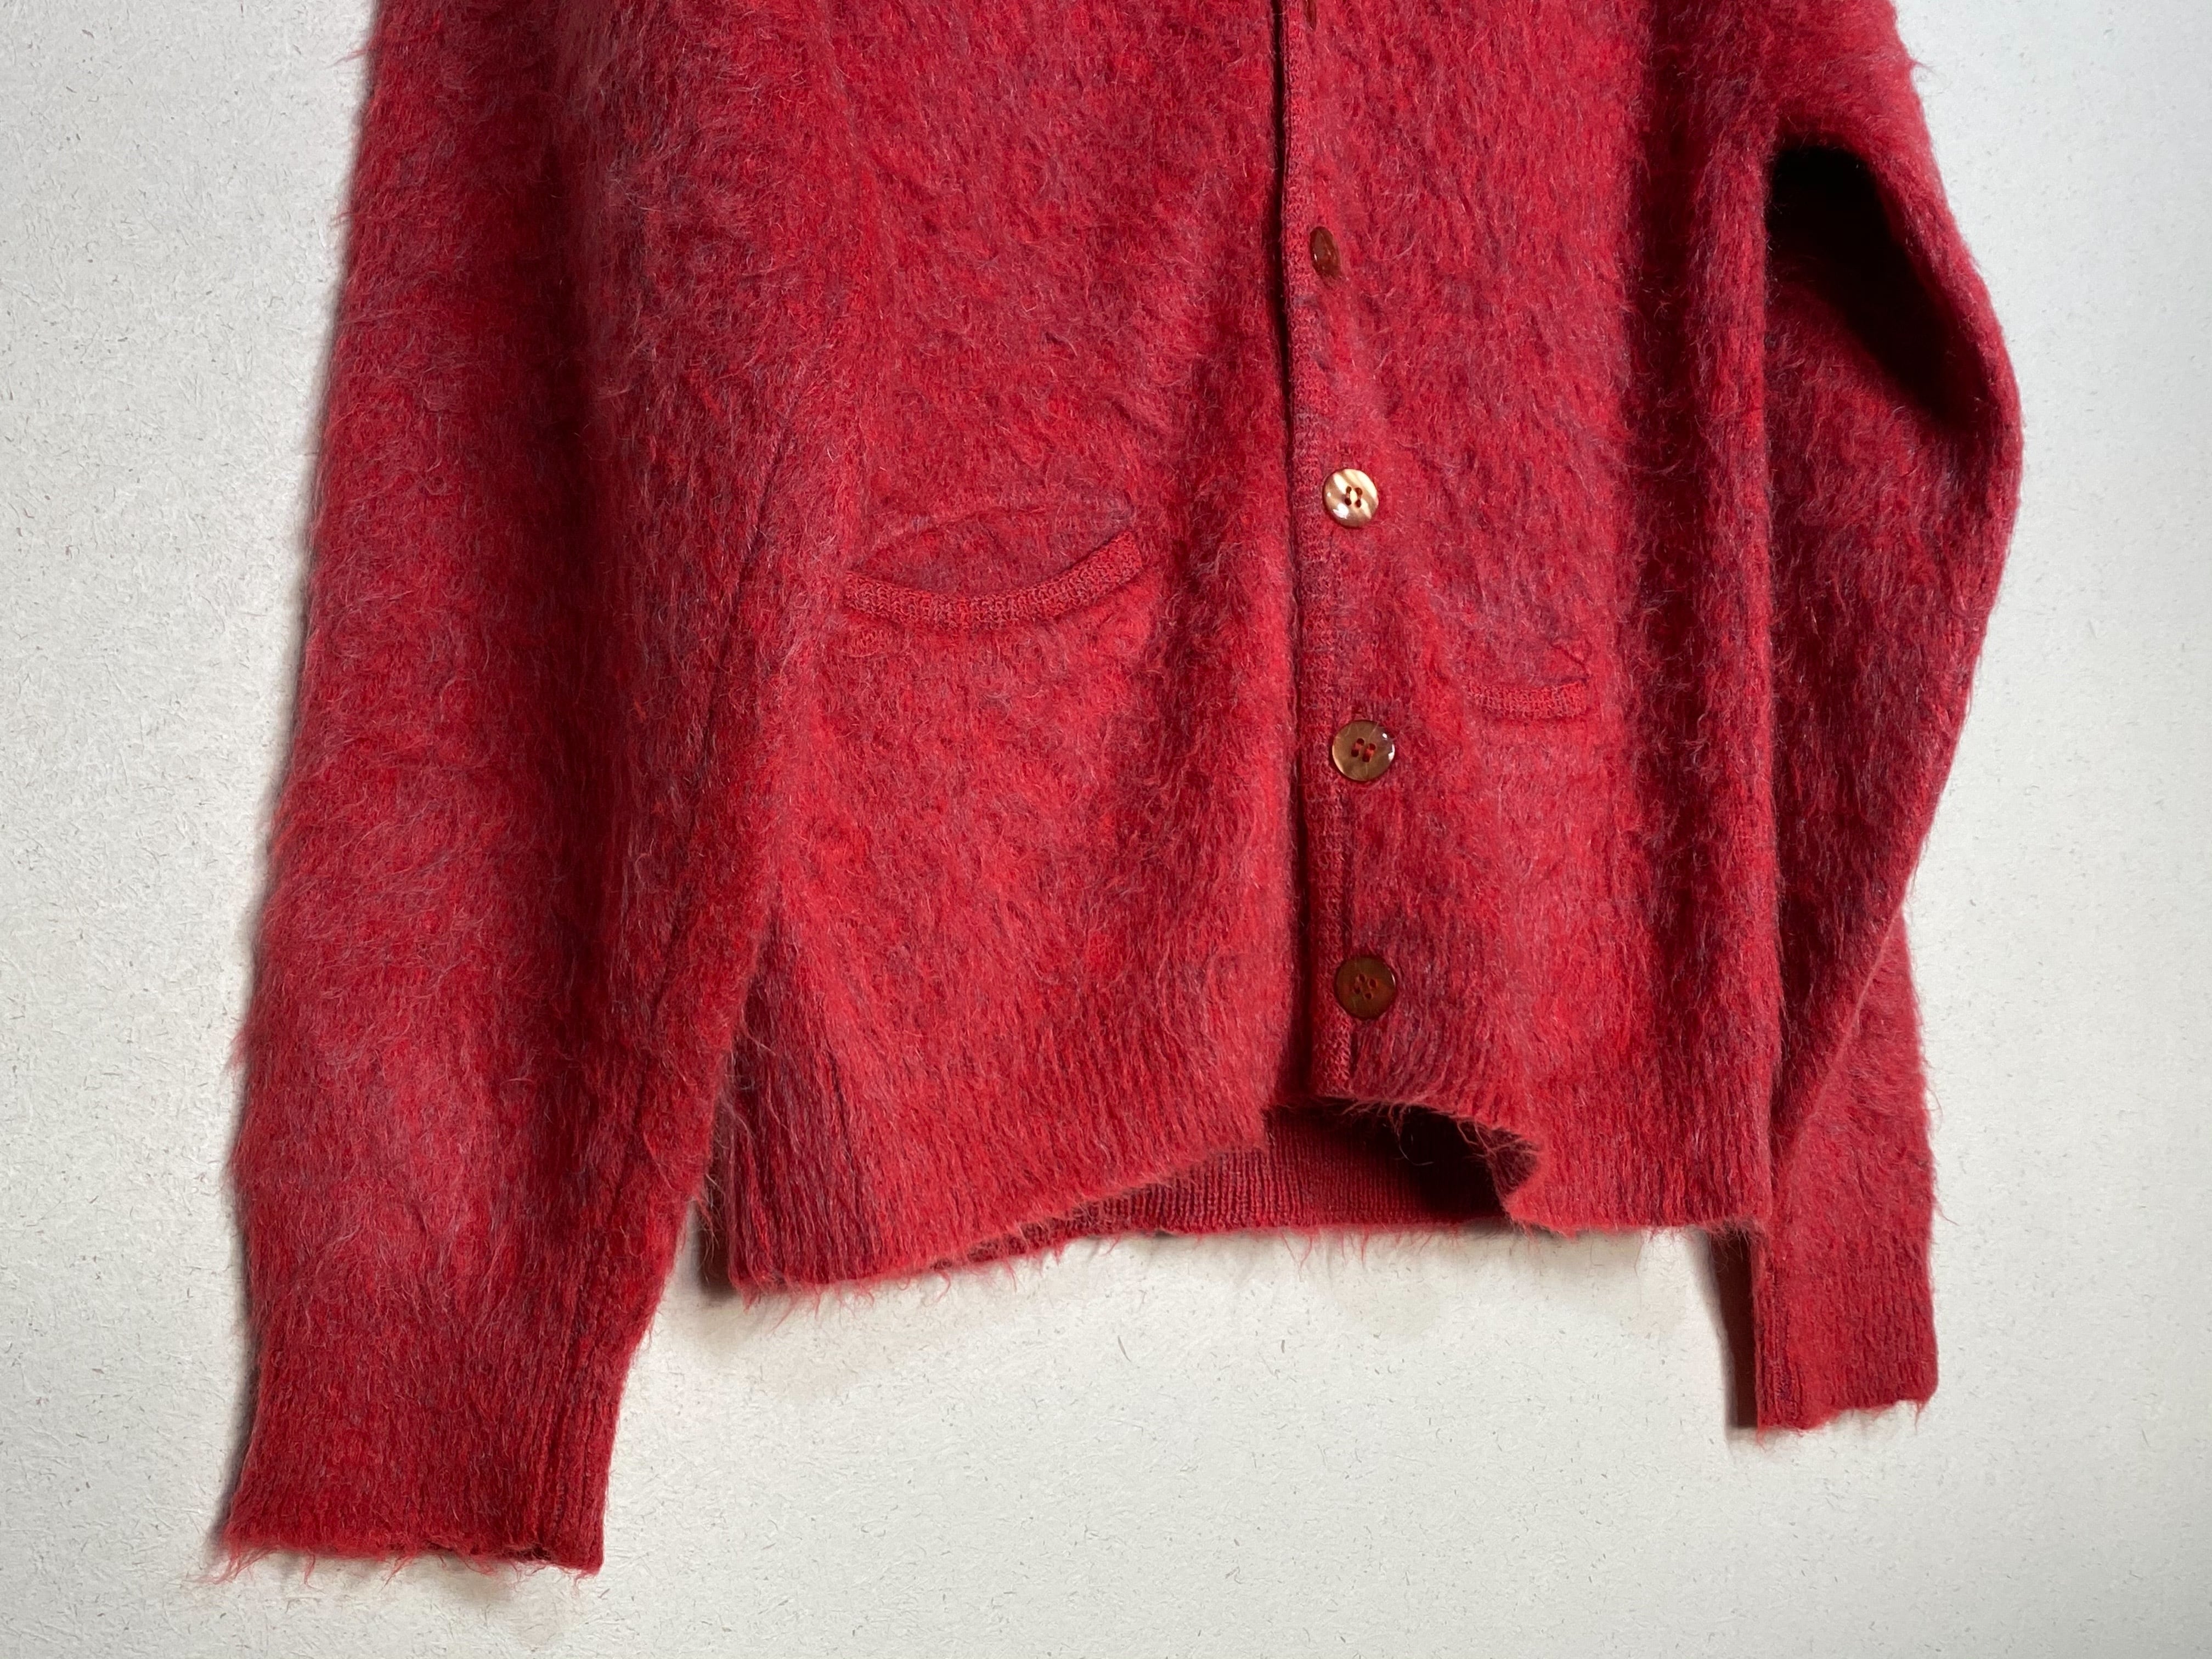 70's Sears traditional collection mohair cardigan モヘア